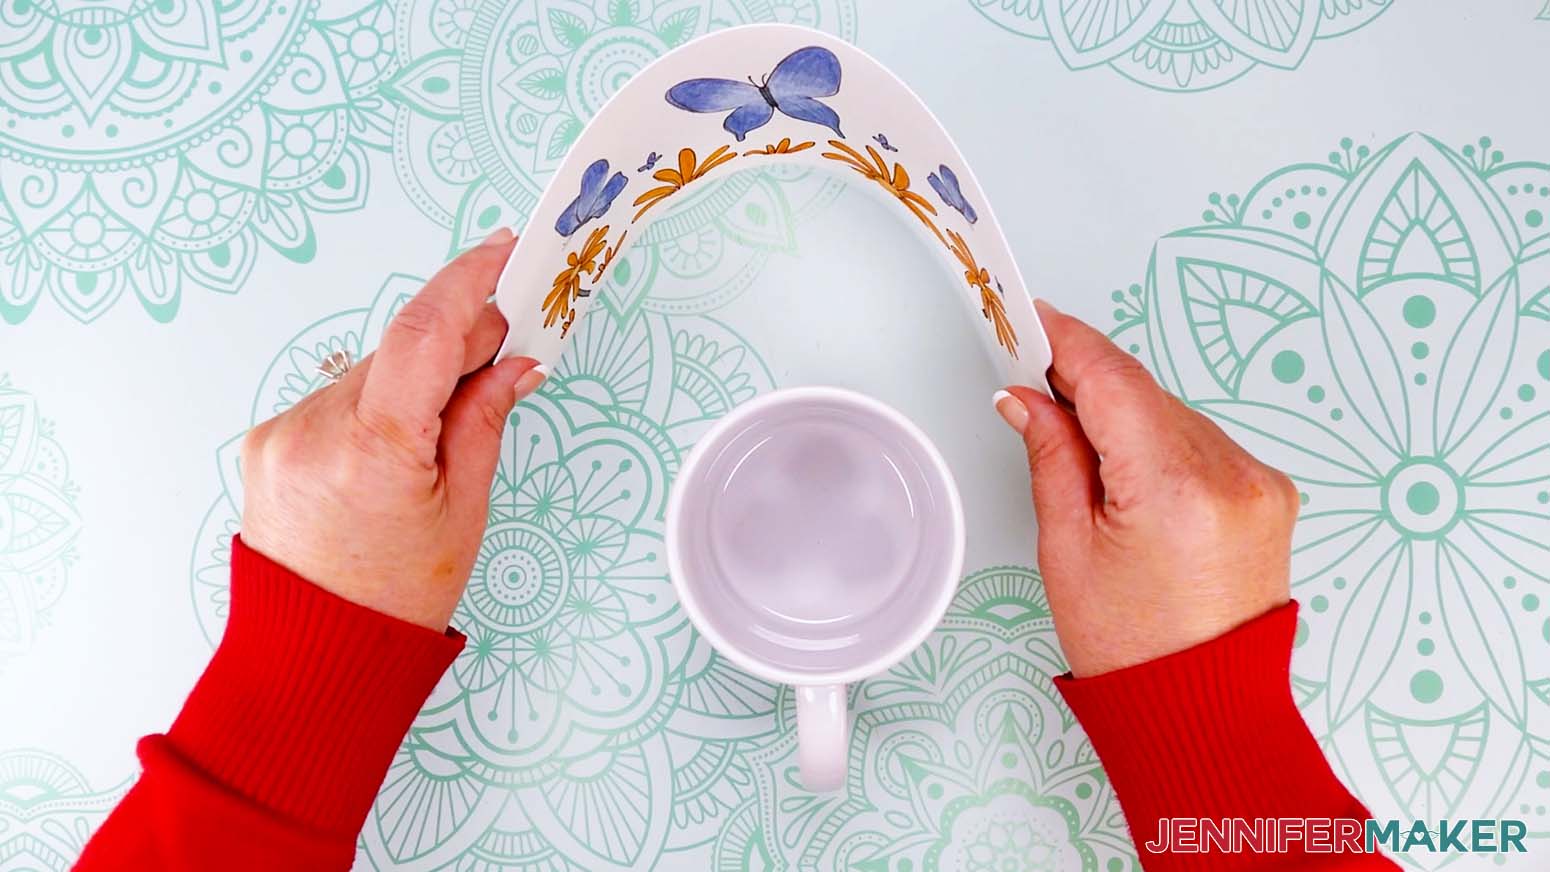 Watercolor paper is thicker than normal printer or sublimation paper, so taking some extra time to tape the design very tightly around the mug creates a better transfer and creates the detail we want from the paper’s texture.